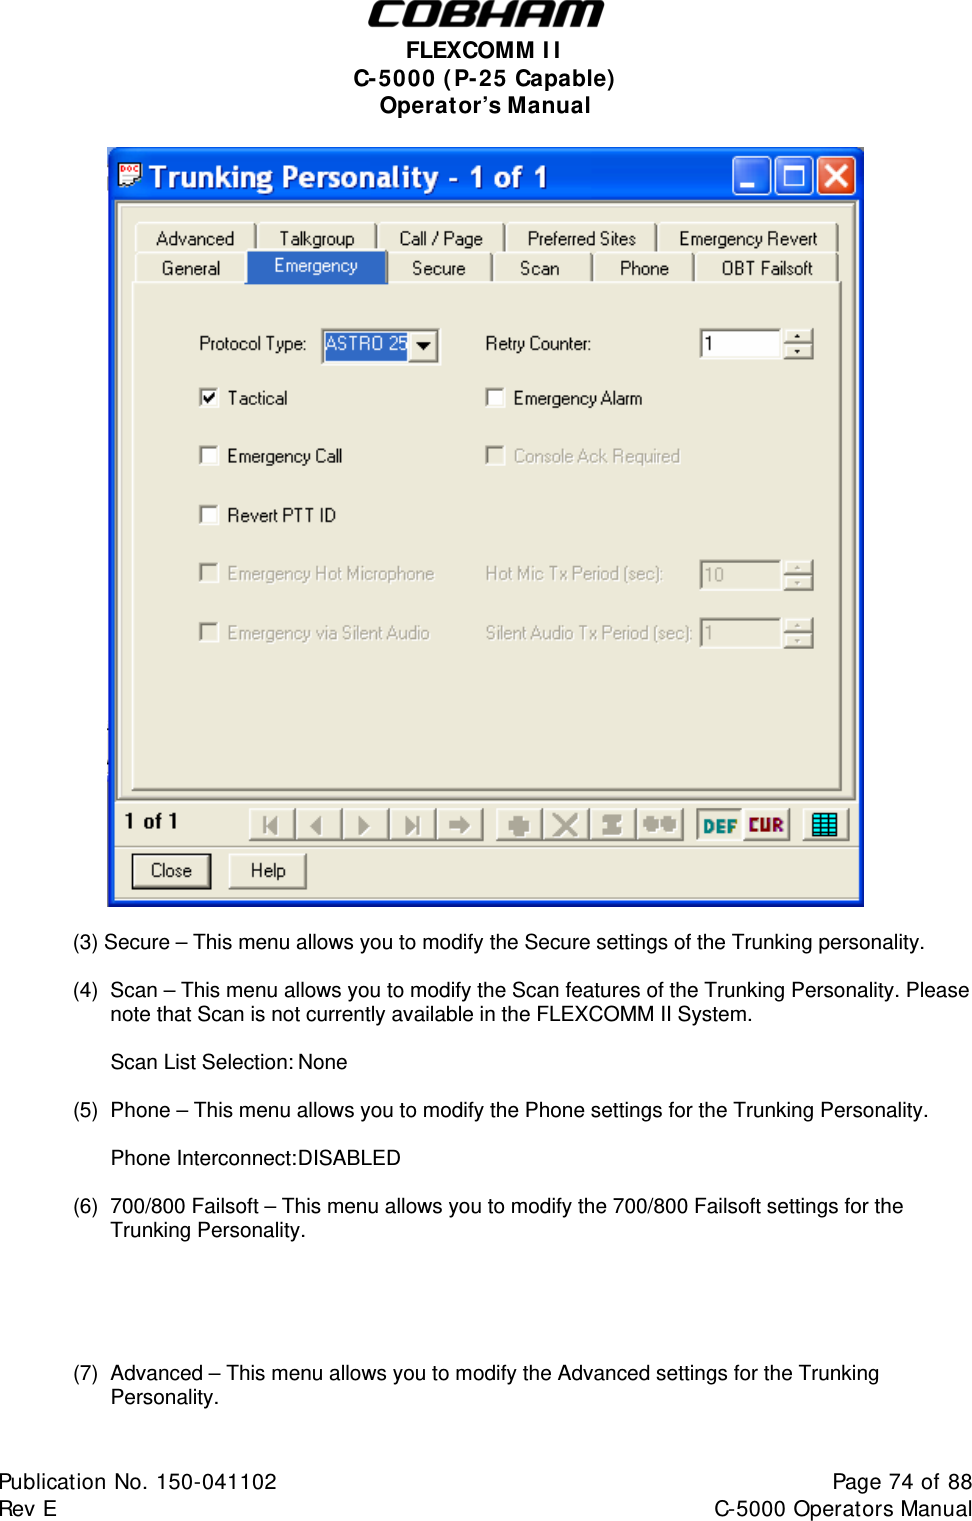  FLEXCOMM I I  C-5000 ( P-25 Capable)  Operator’s Manual   (3) Secure – This menu allows you to modify the Secure settings of the Trunking personality.  (4)  Scan – This menu allows you to modify the Scan features of the Trunking Personality. Please note that Scan is not currently available in the FLEXCOMM II System.    Scan List Selection: None  (5)  Phone – This menu allows you to modify the Phone settings for the Trunking Personality.   Phone Interconnect: DISABLED  (6)  700/800 Failsoft – This menu allows you to modify the 700/800 Failsoft settings for the Trunking Personality.      (7)  Advanced – This menu allows you to modify the Advanced settings for the Trunking Personality.  Publication No. 150-041102  Page 74 of 88  Rev E  C-5000 Operators Manual    